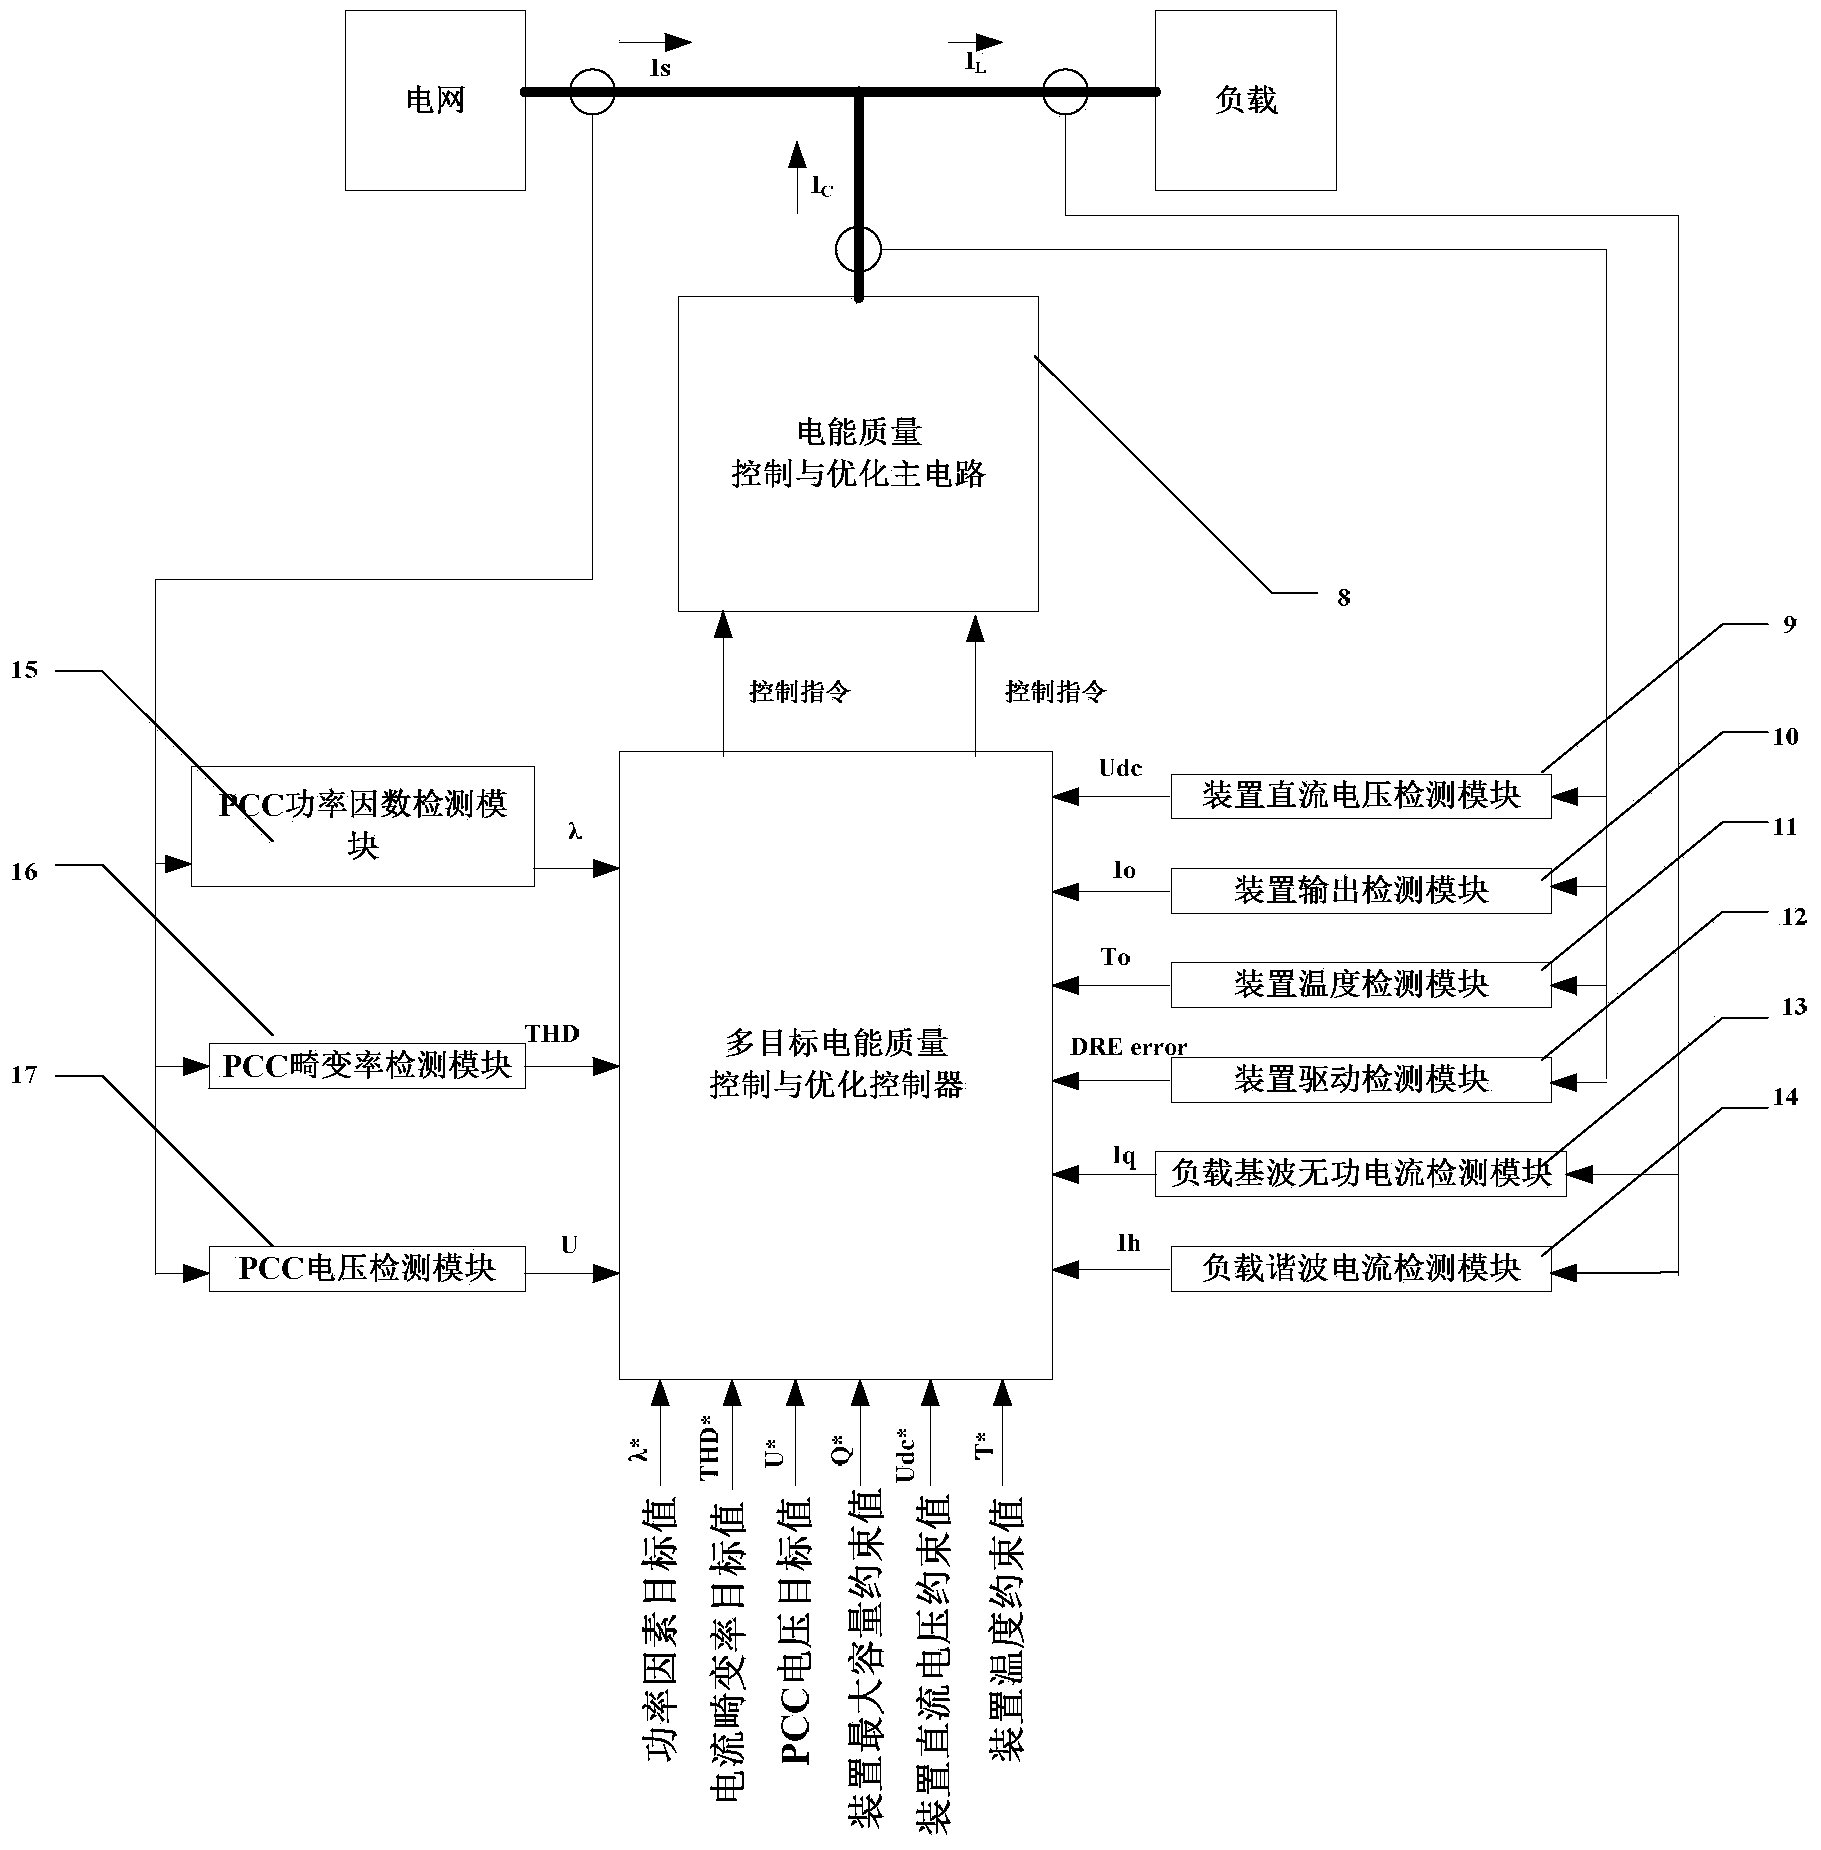 Multi-target electric energy quality comprehensive control and optimization device